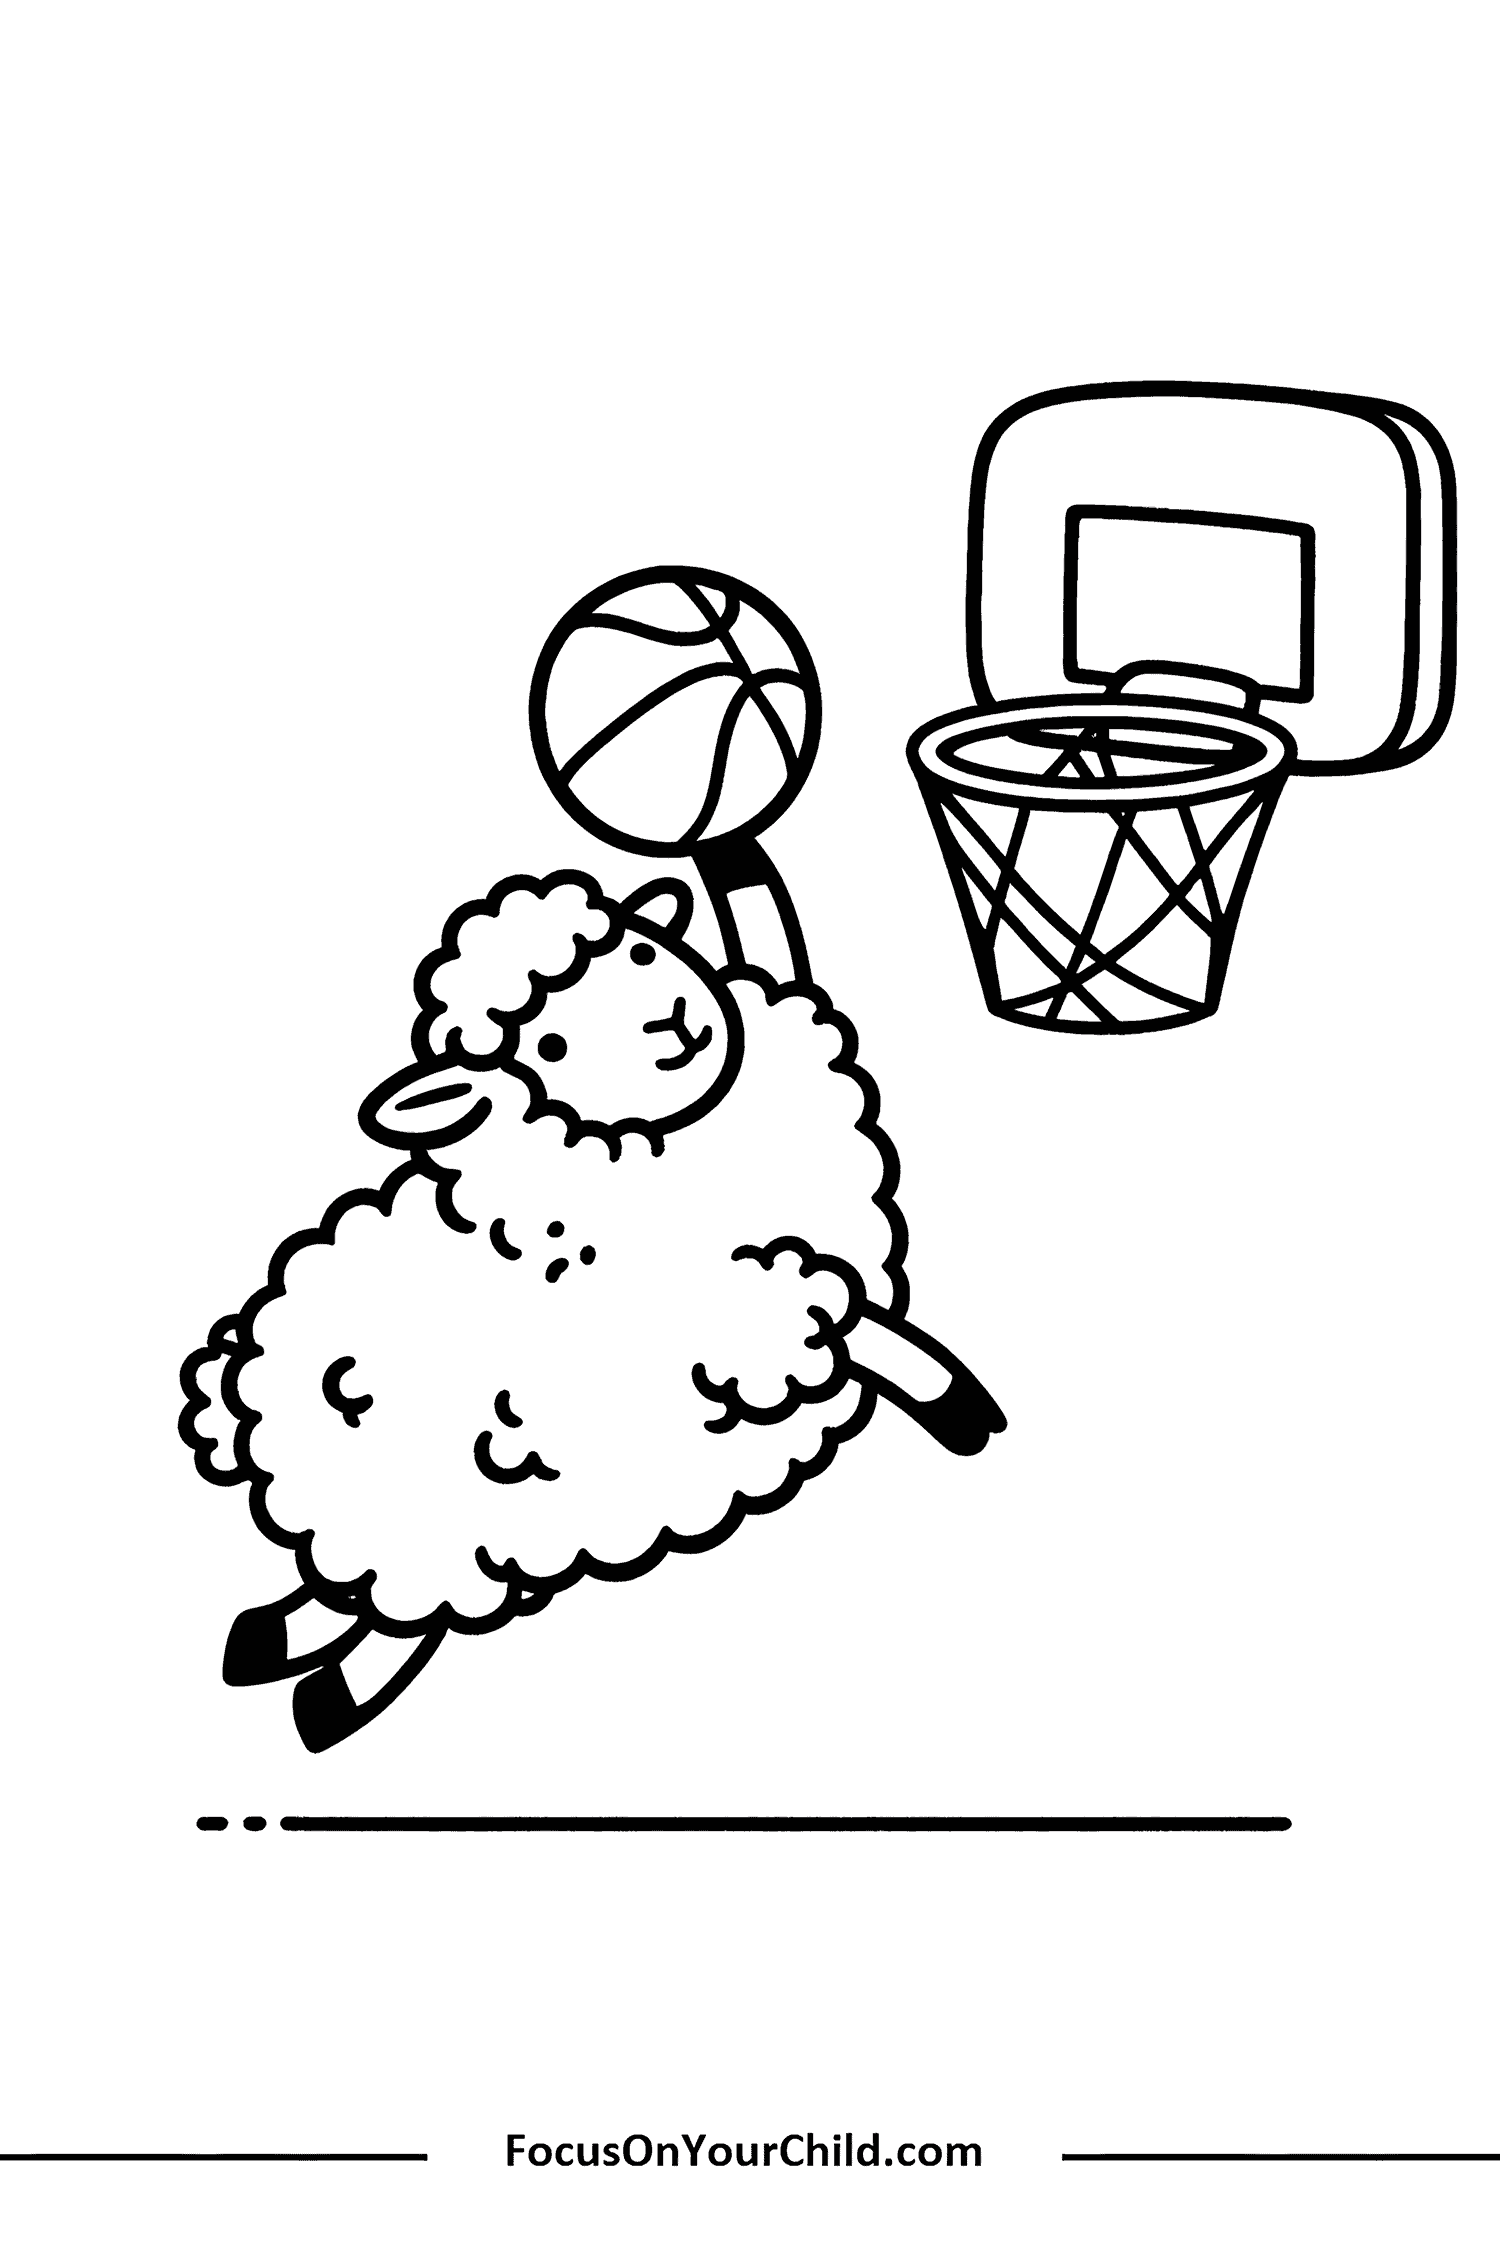 Playful sheep making slam dunk in basketball hoop, engaging educational content for children.